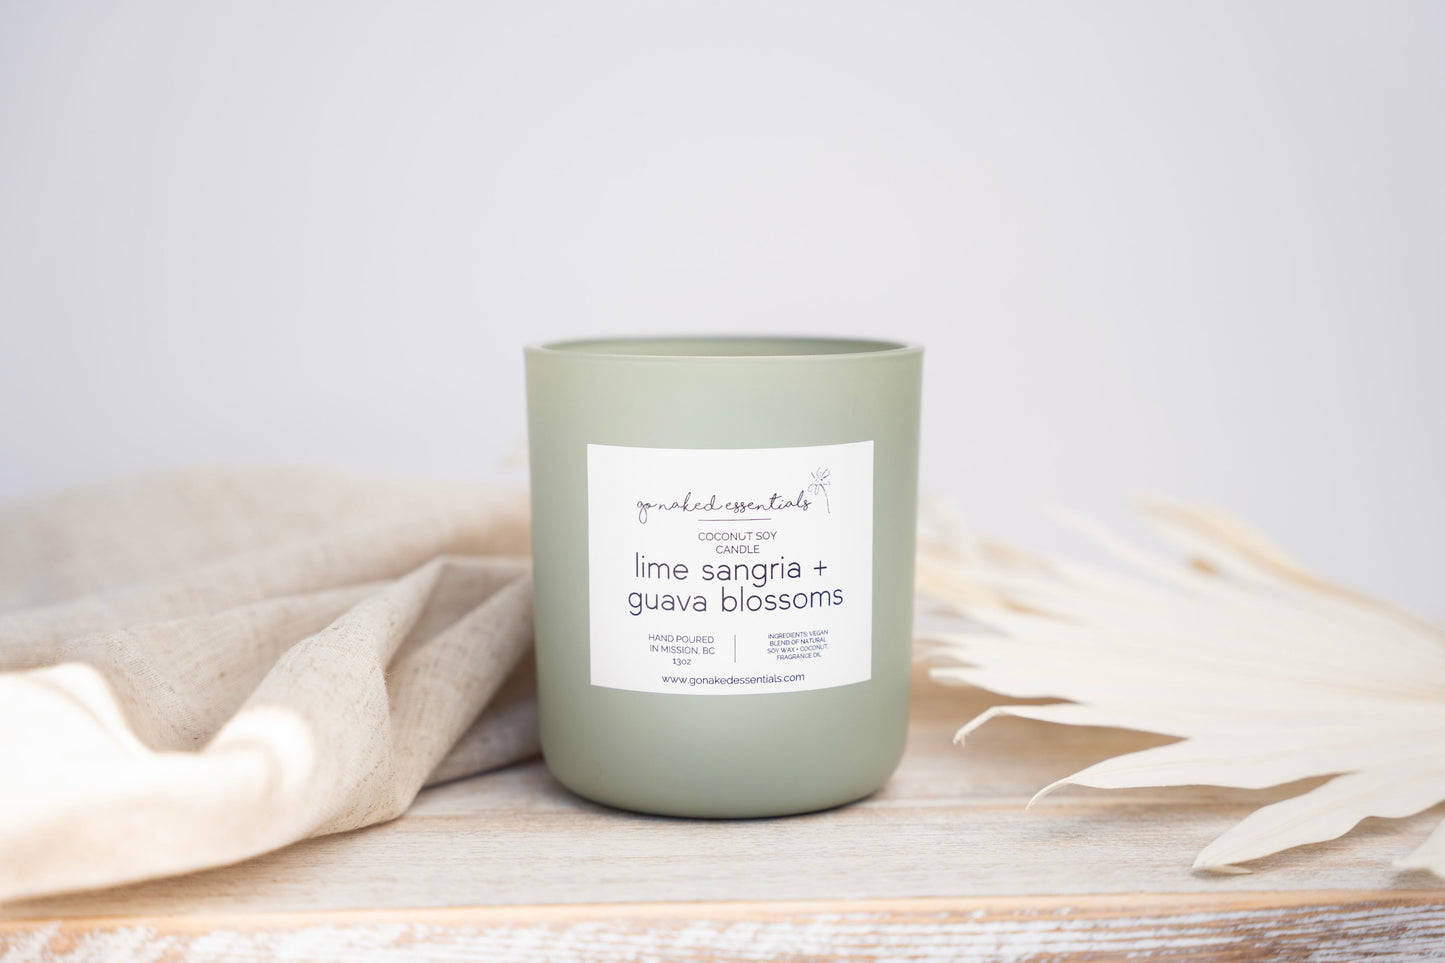 Lime Sangria + Guava Blossoms Coconut Soy Candle